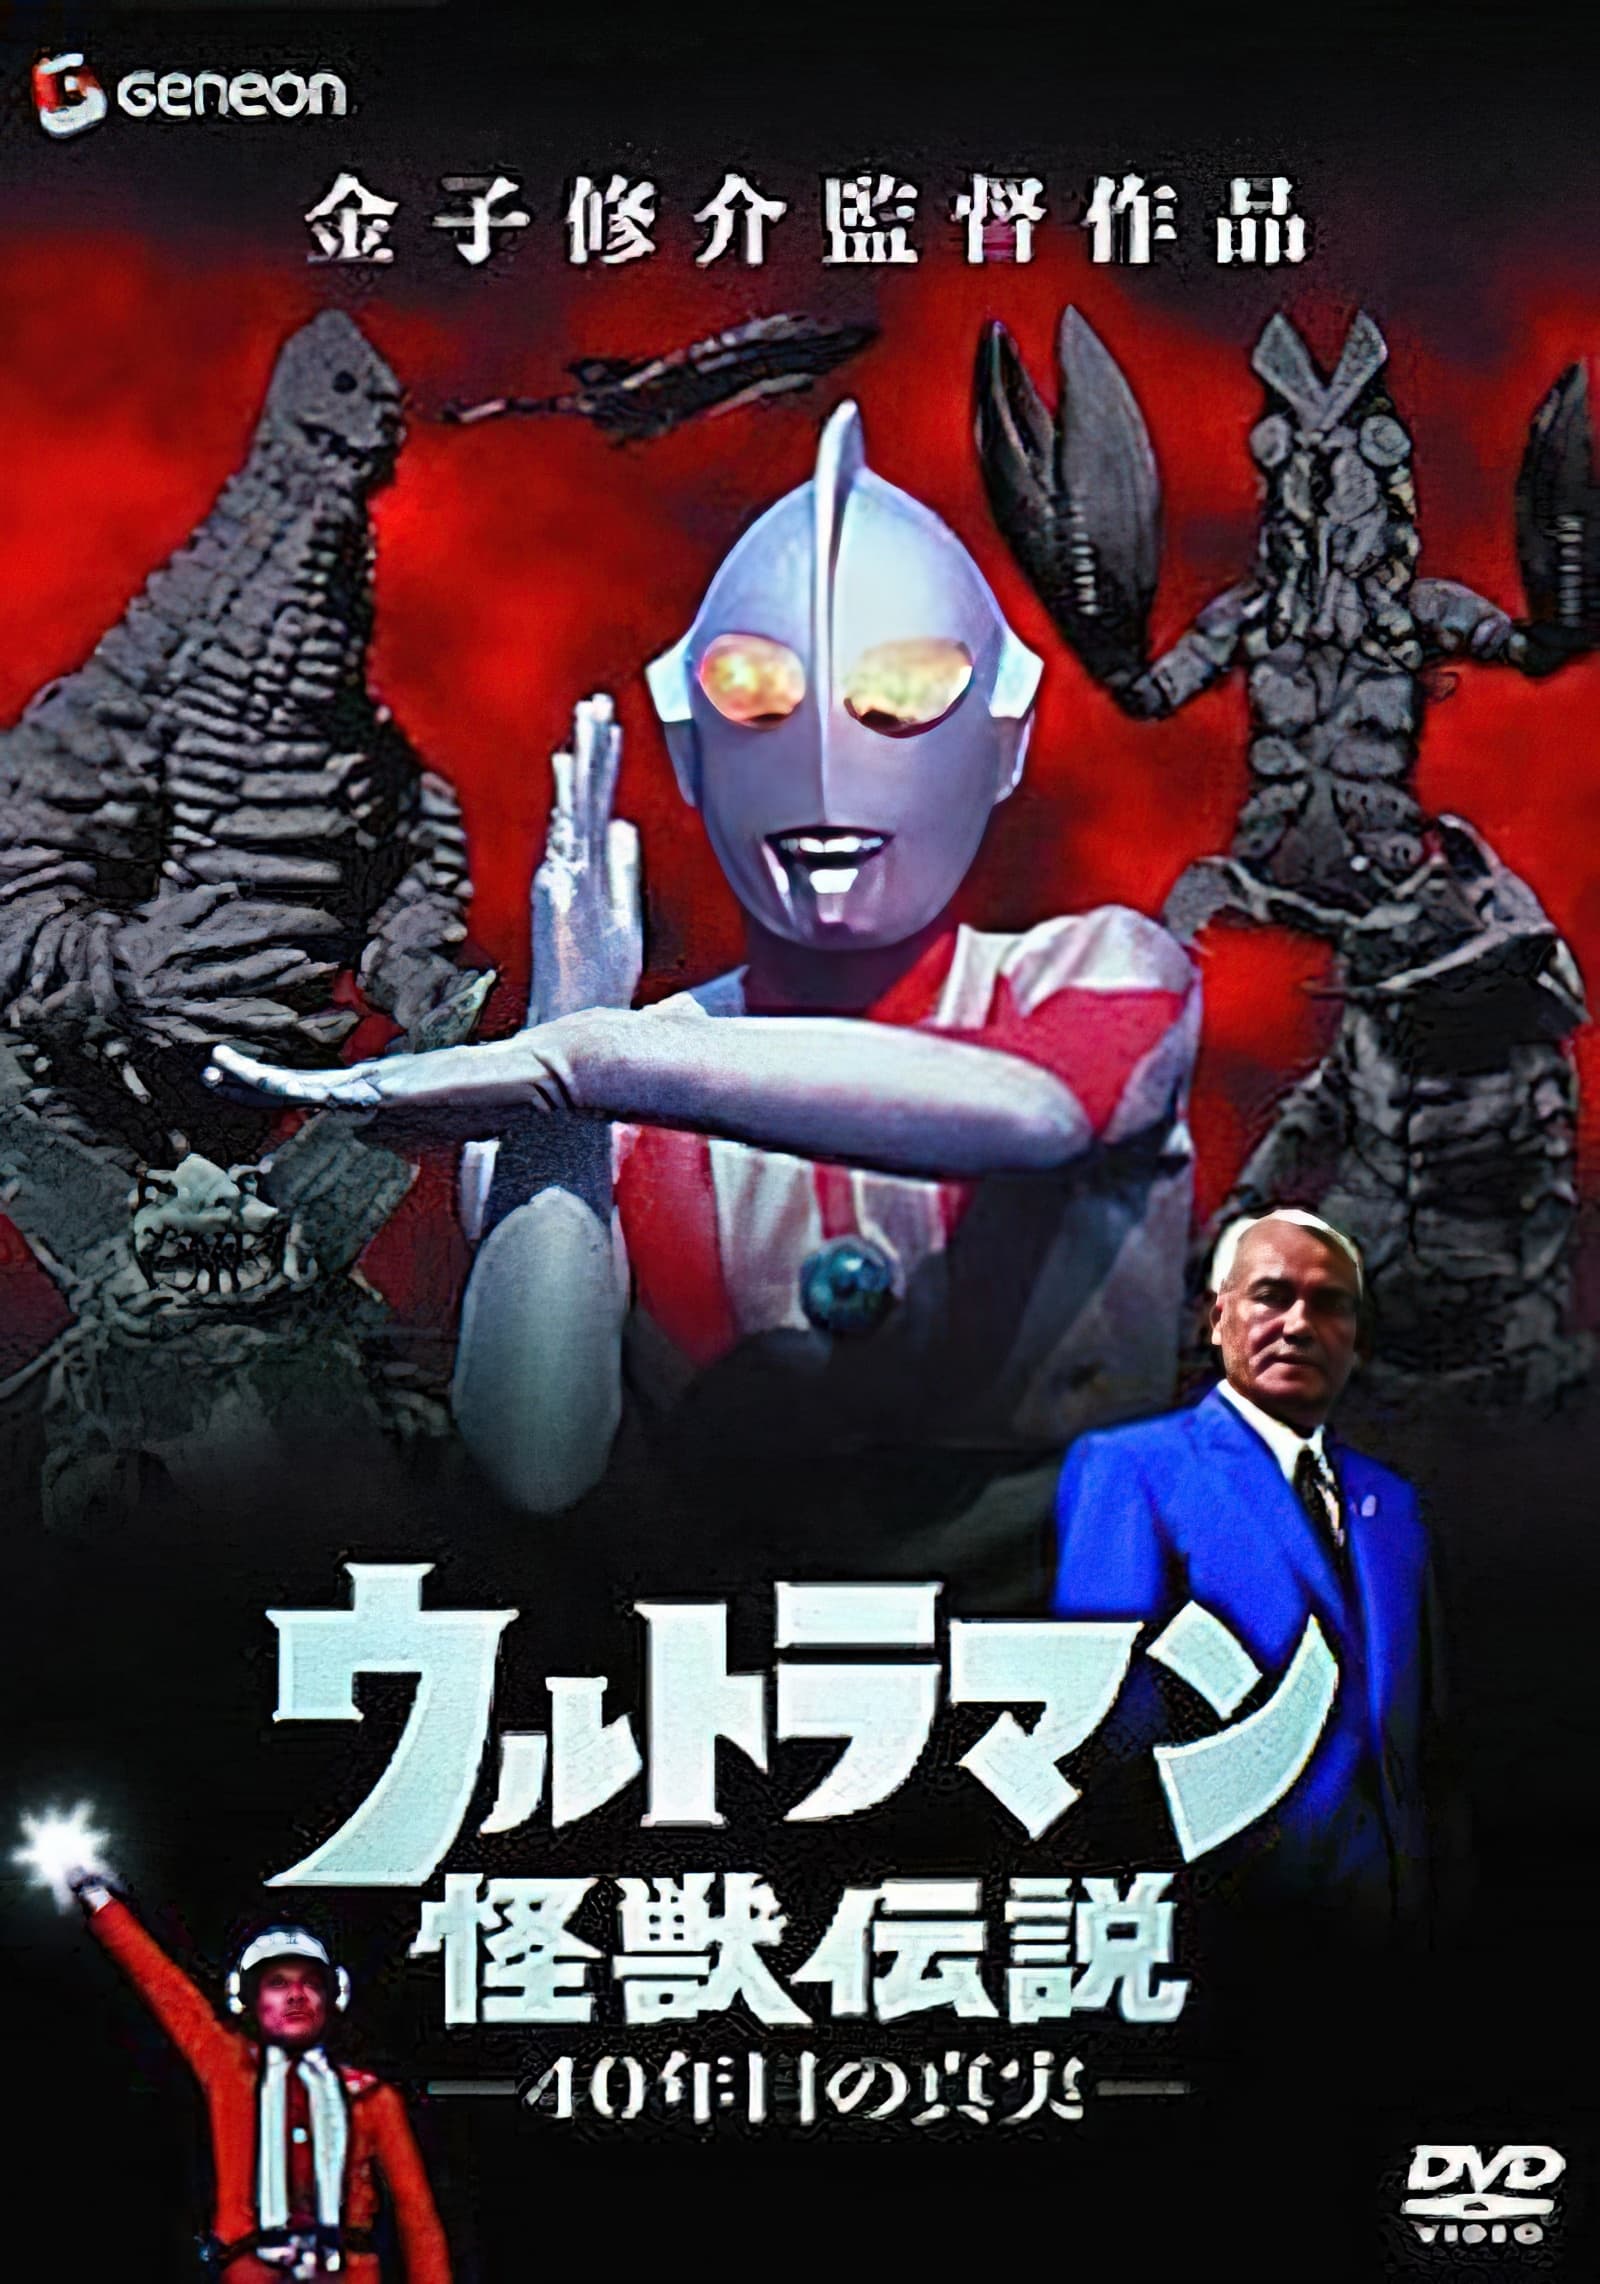 Ultraman Monster Legend: The 40 Year Old Truth